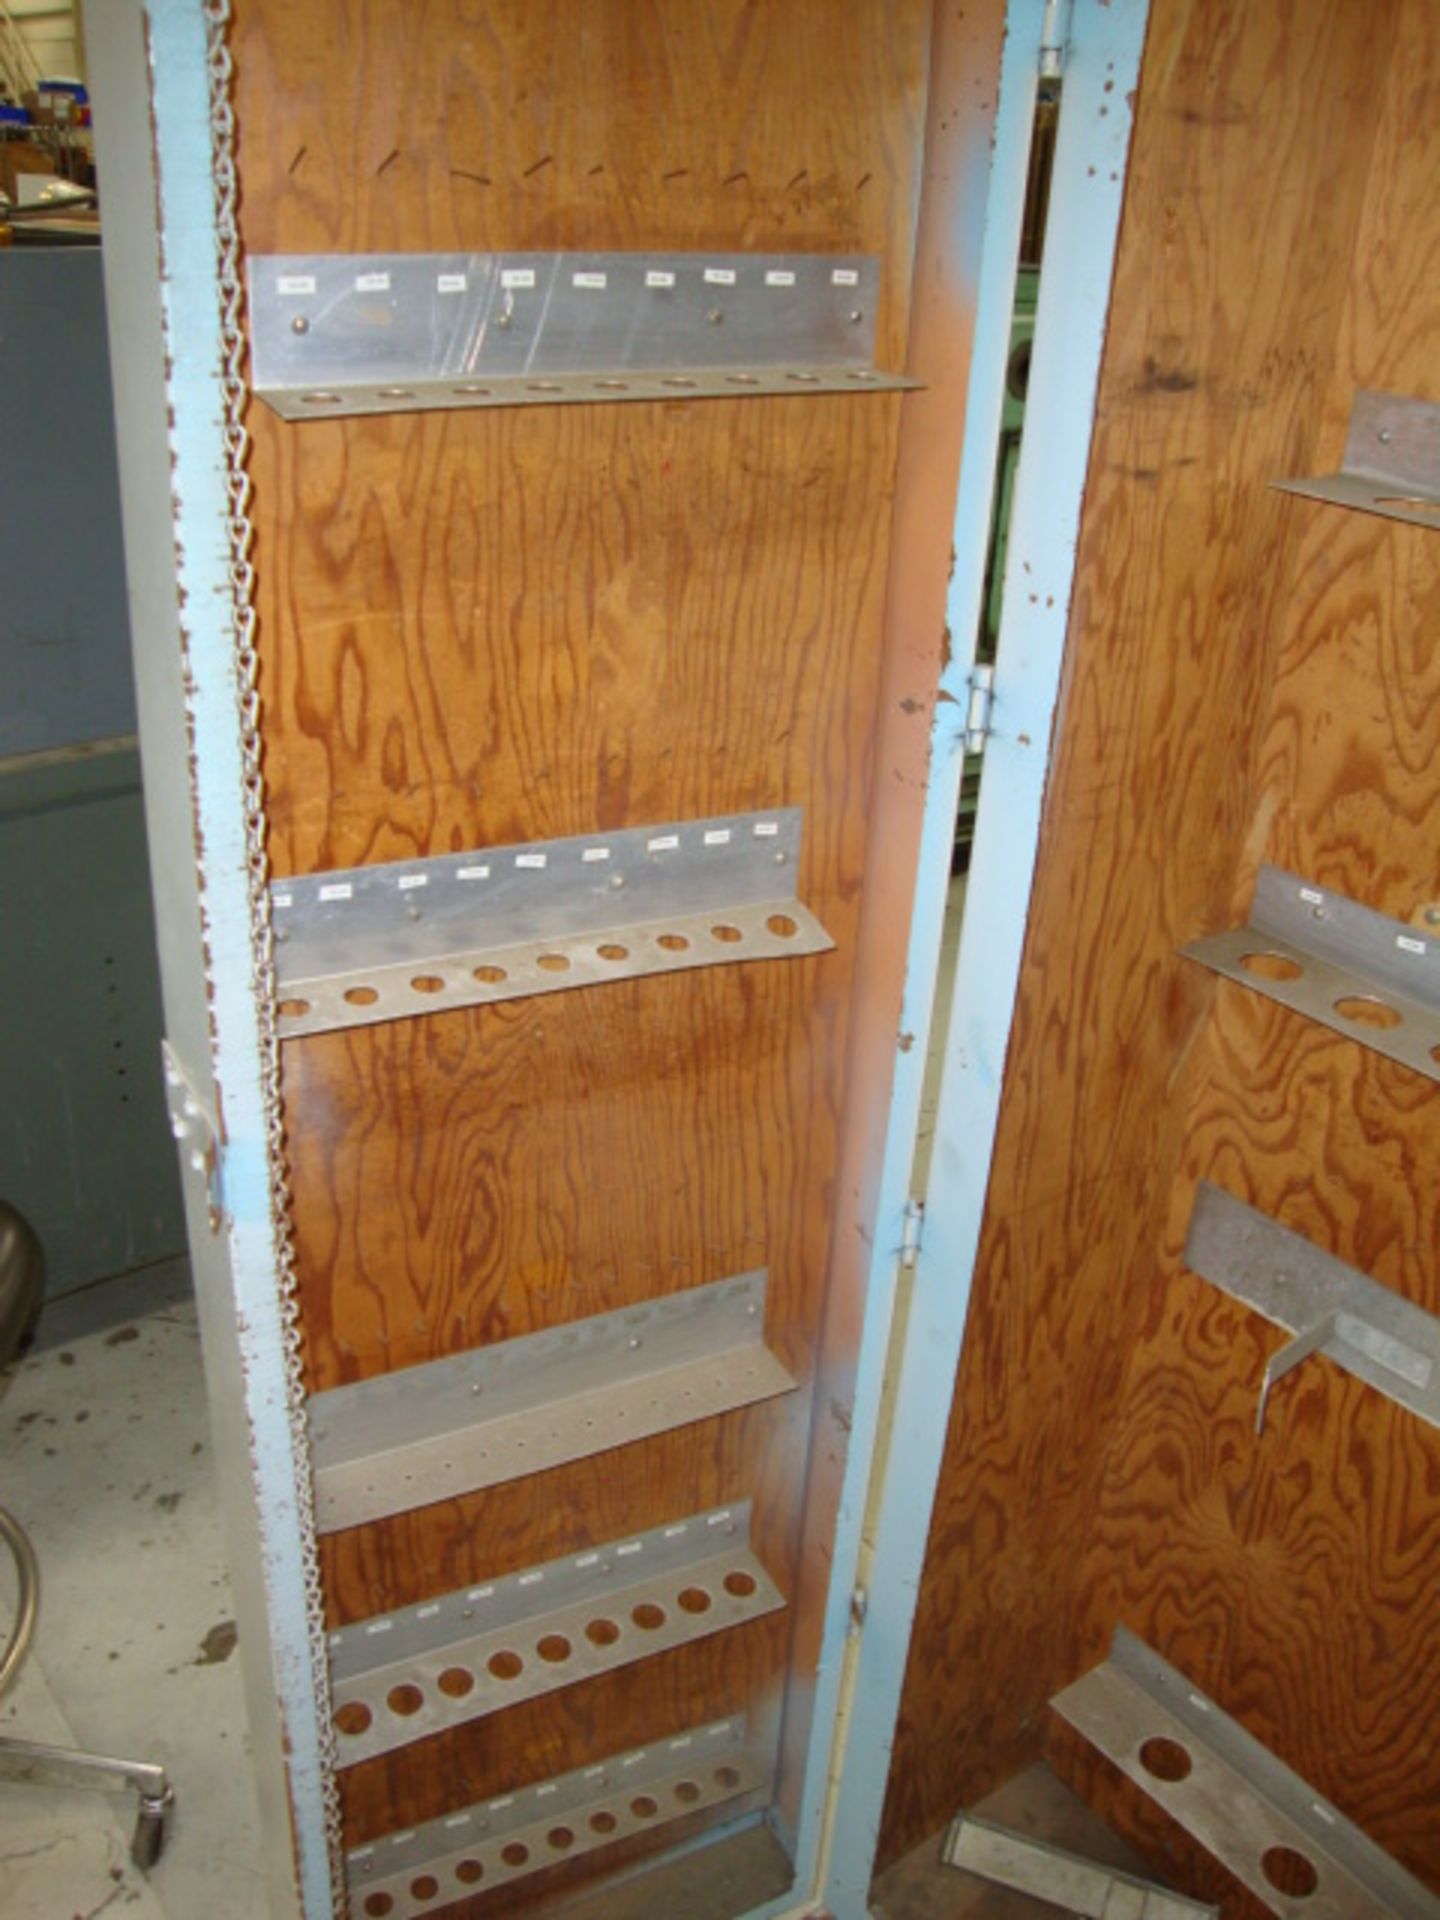 HD Storage Cabinet, approx. 36" x 16" x 78" tall - Image 3 of 4